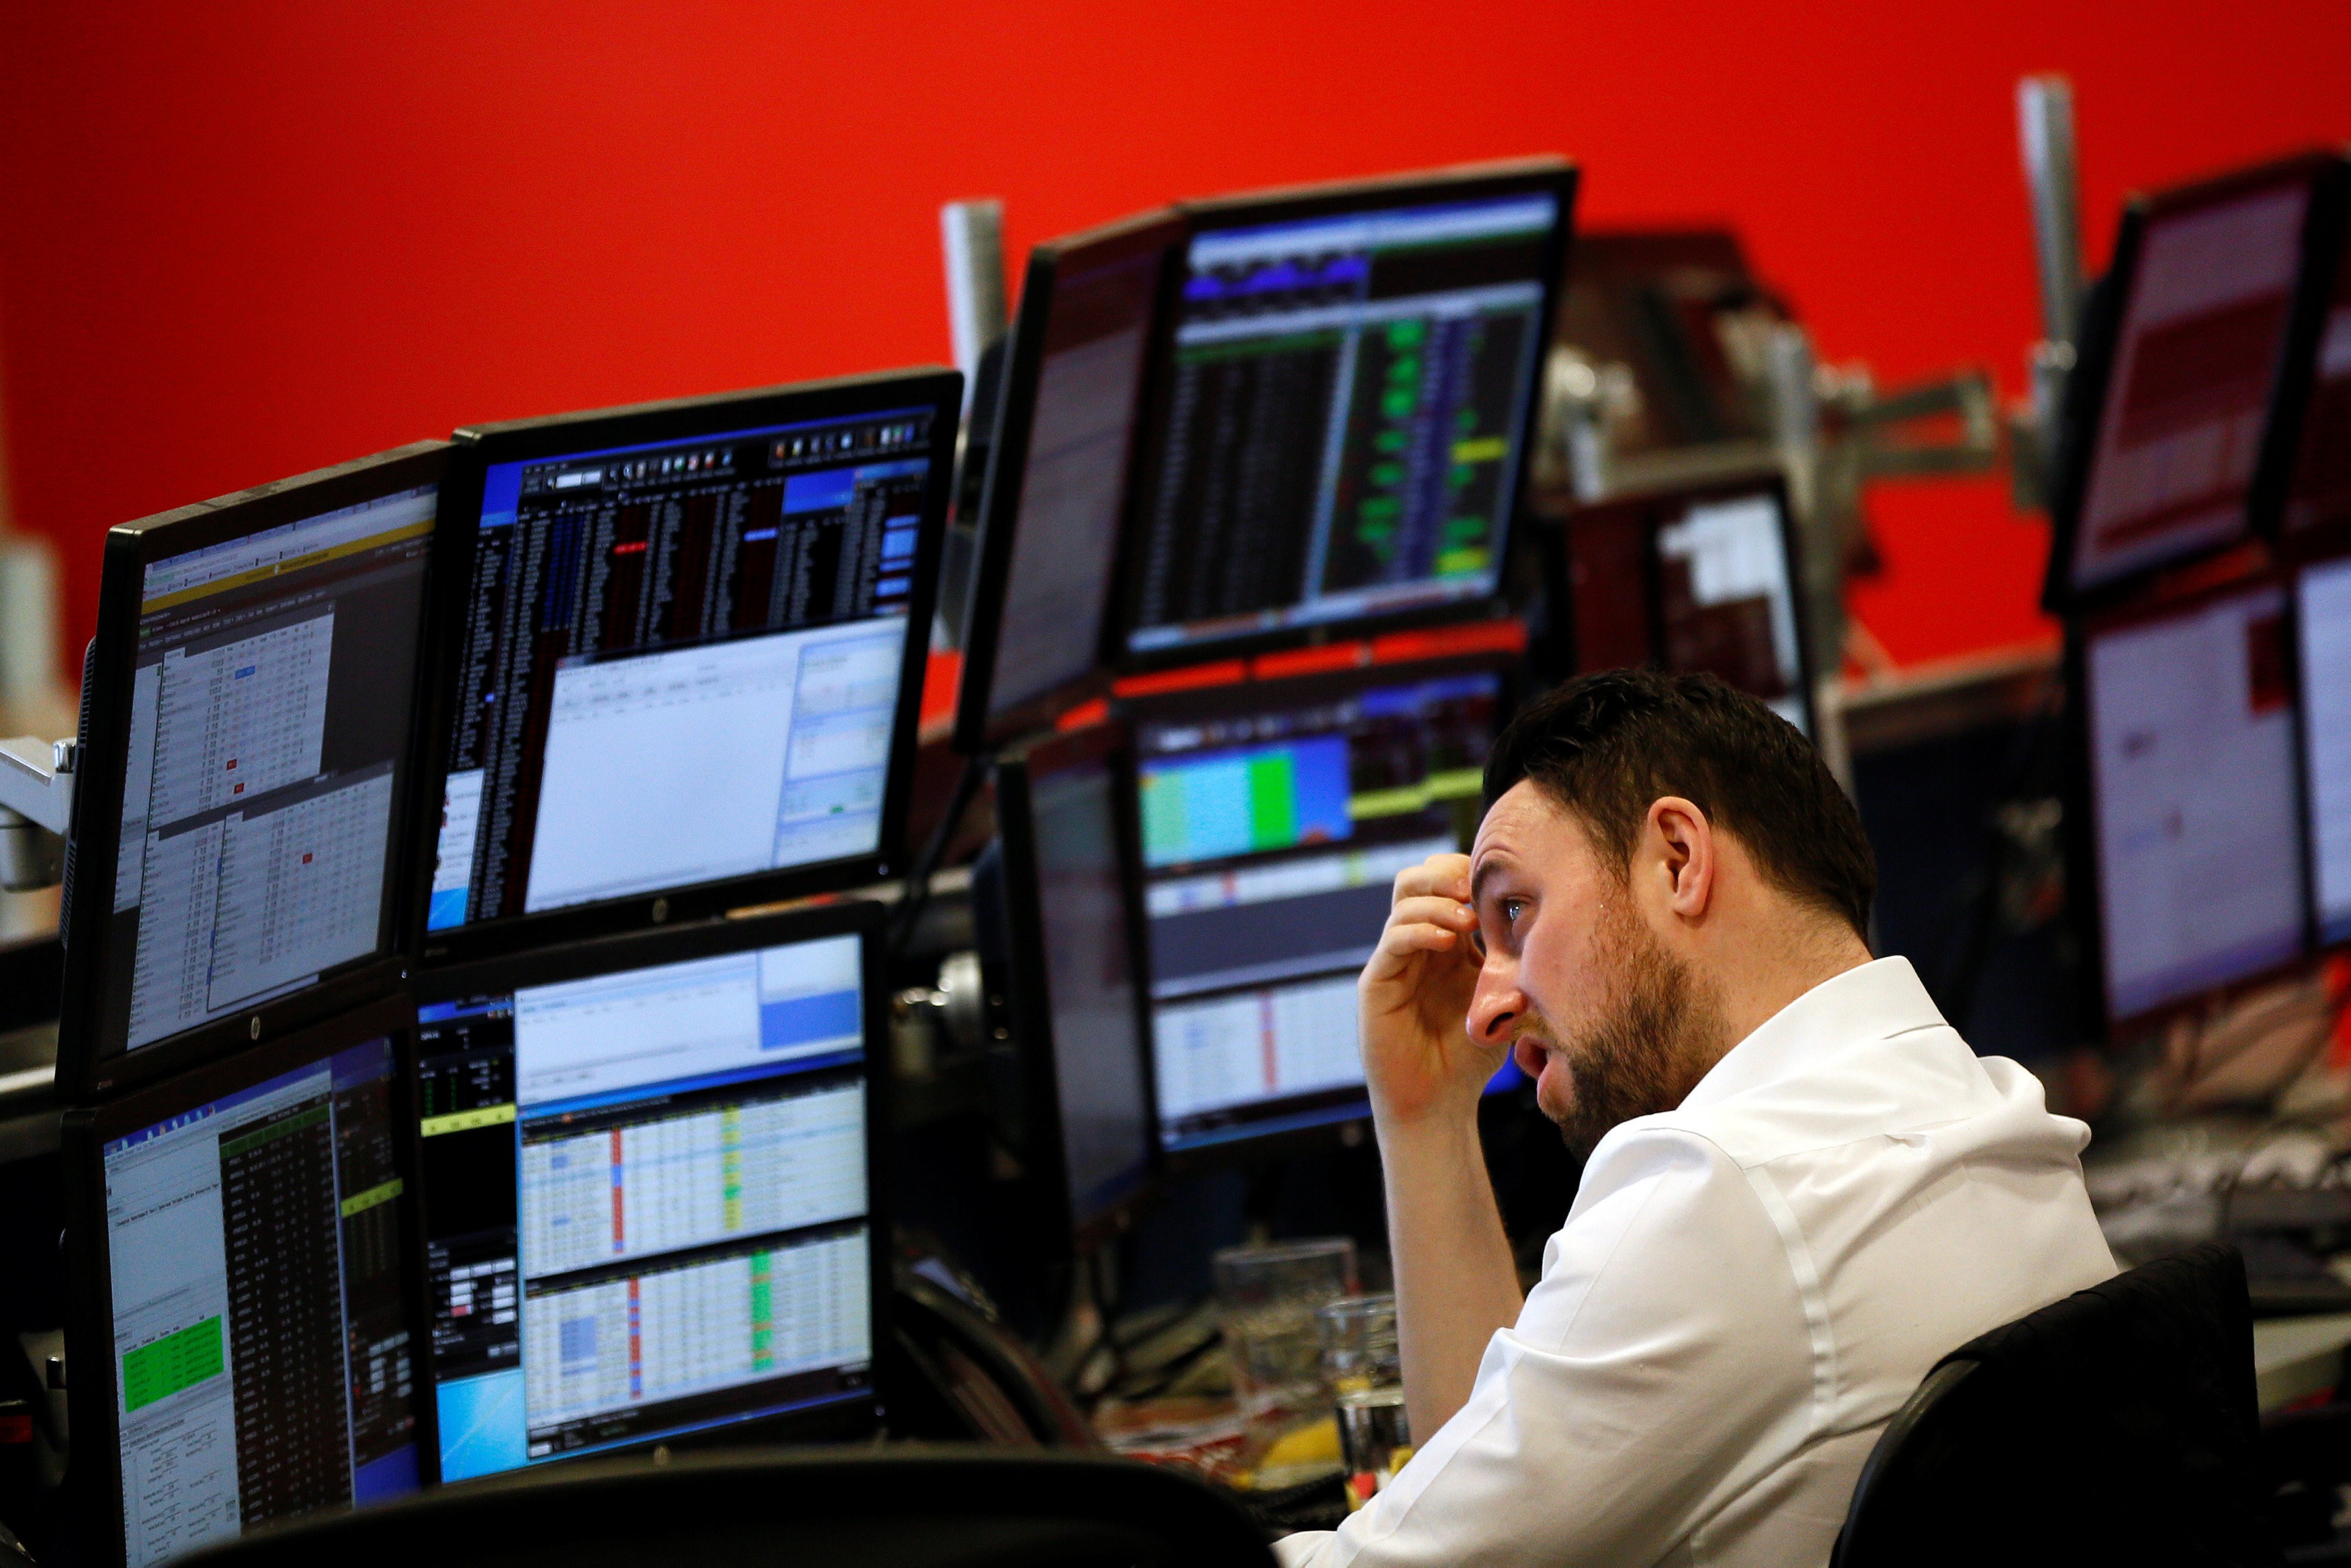 A market maker works on the trading floor at IG Index in London on January 14, 2016. Photo: REUTERS